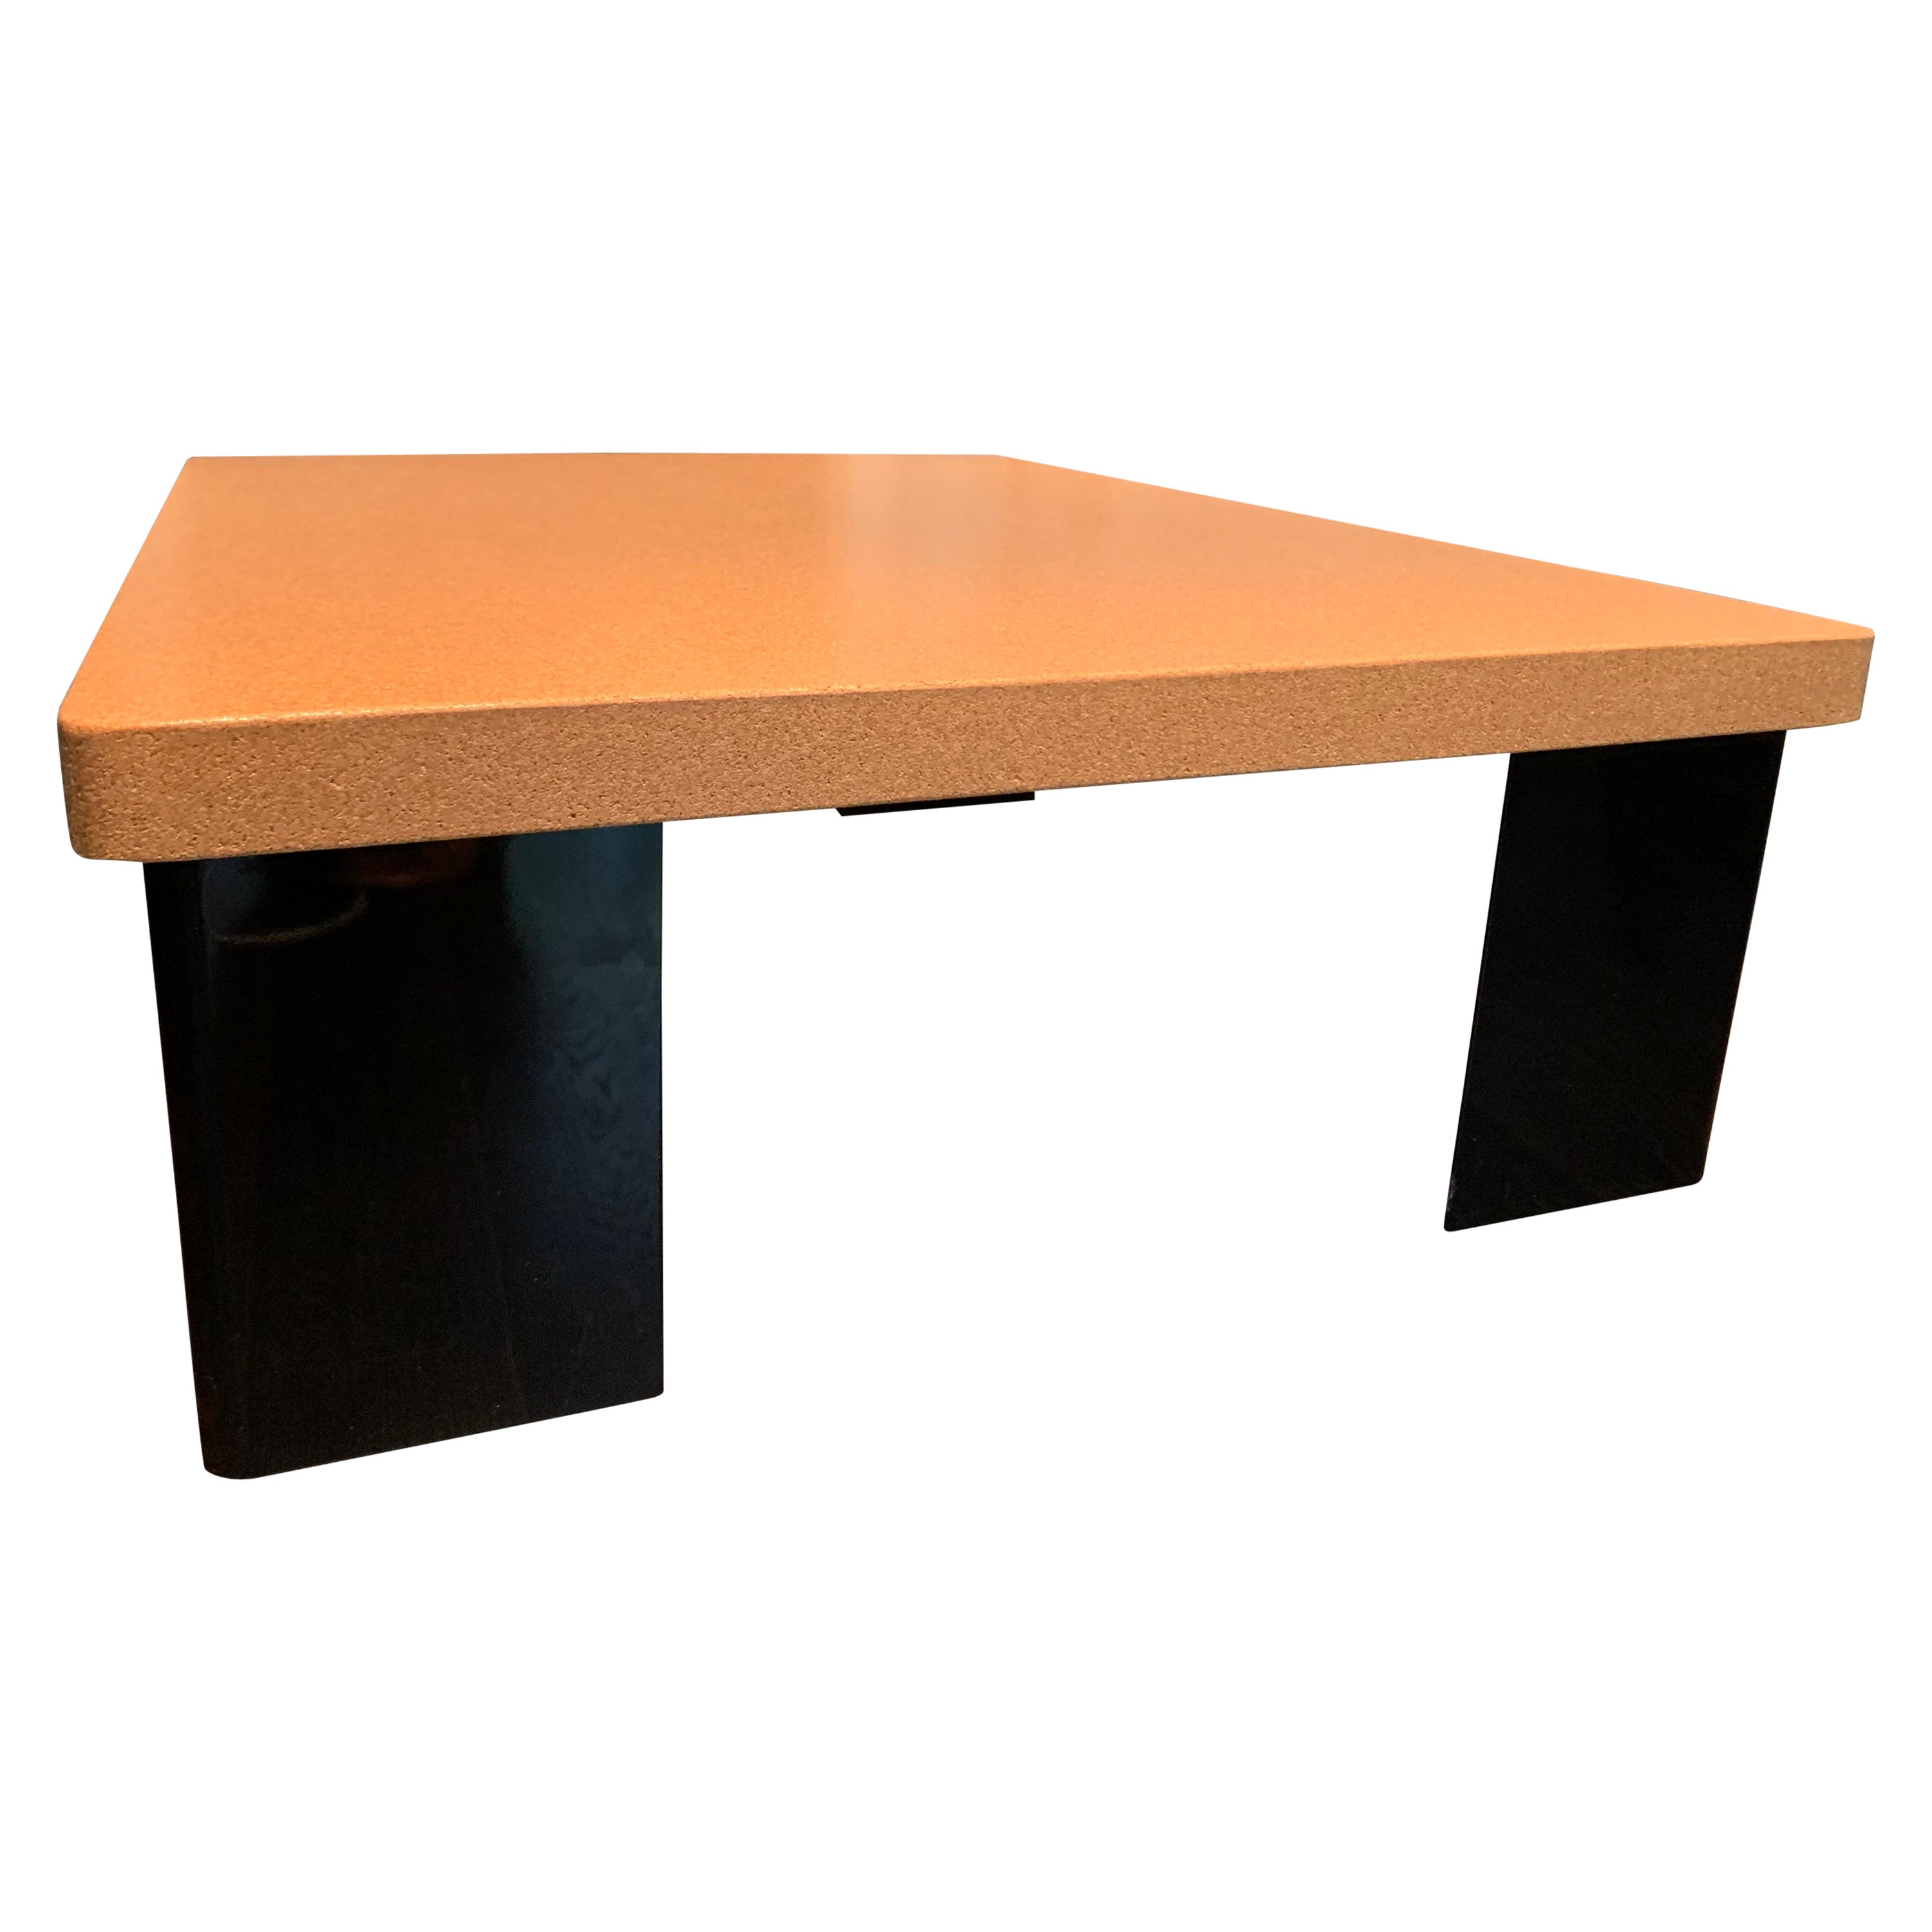 Lacquered Cork Coffee Table With Black Legs For Sale